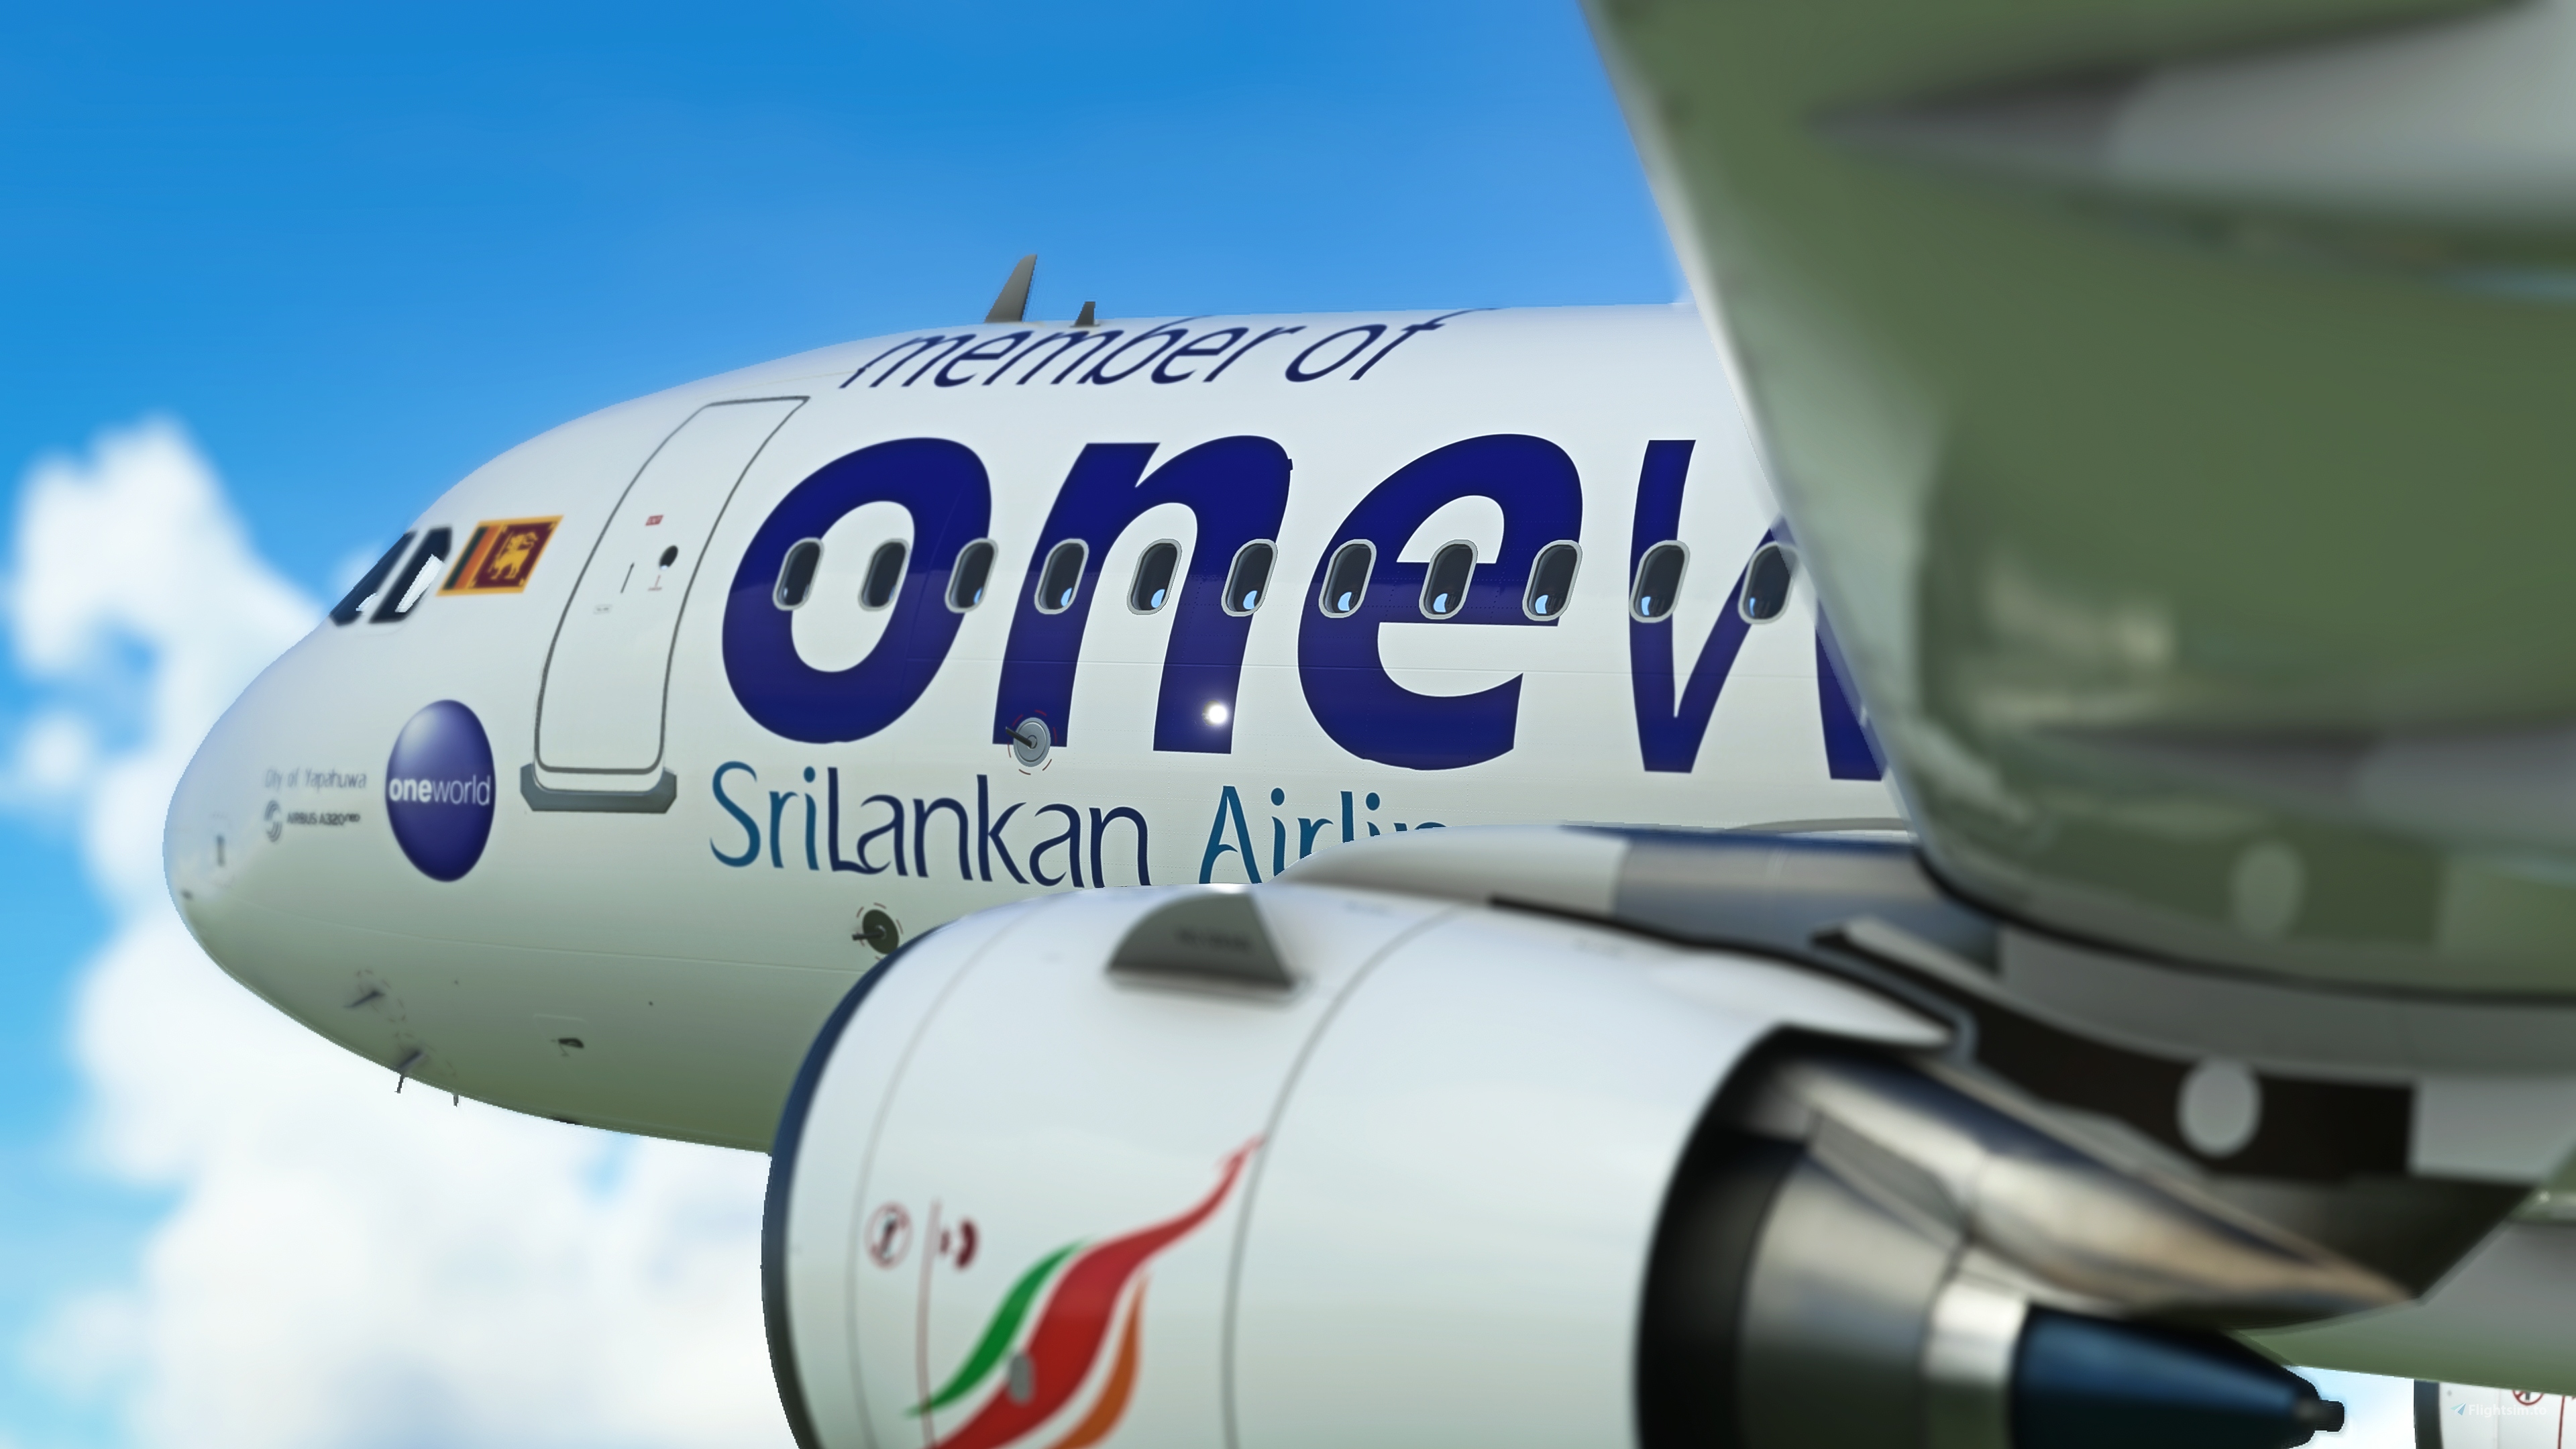 4R-ALQ SriLankan Airlines Airbus A330-343 Photo by Oliver De Francesco | ID  1489628 | Planespotters.net